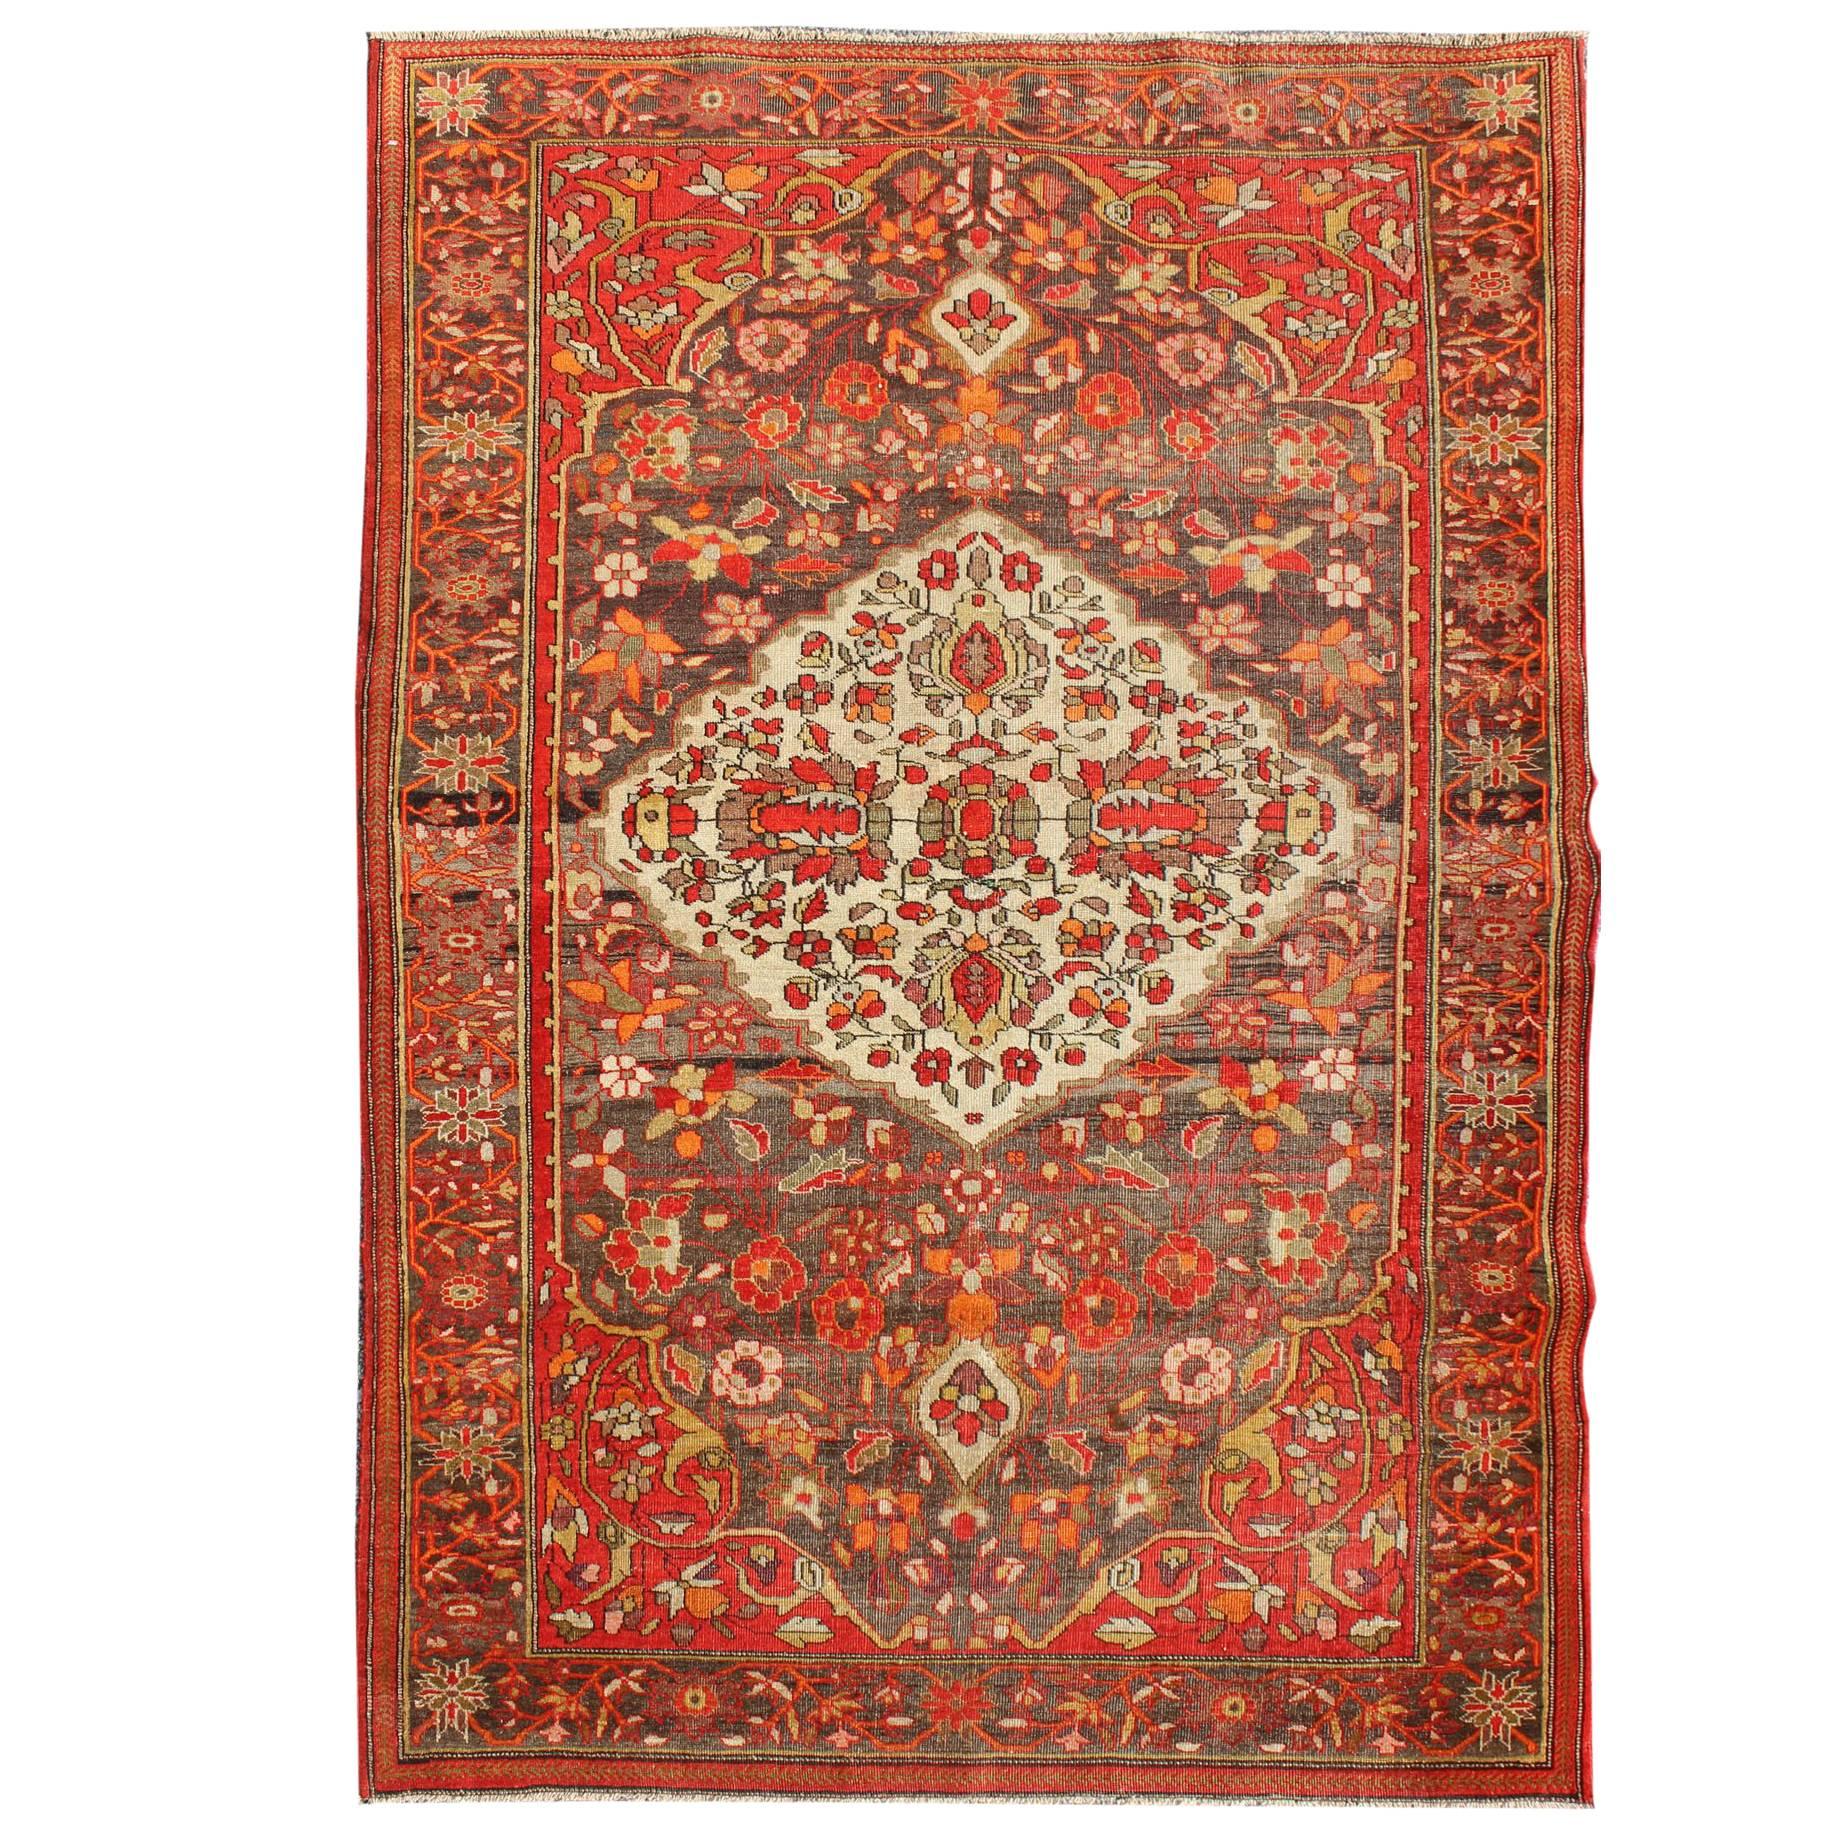 Sarouk Farahan Rug with Florals and Vine Scrolls in Red, Ivory, Taupe and Orange